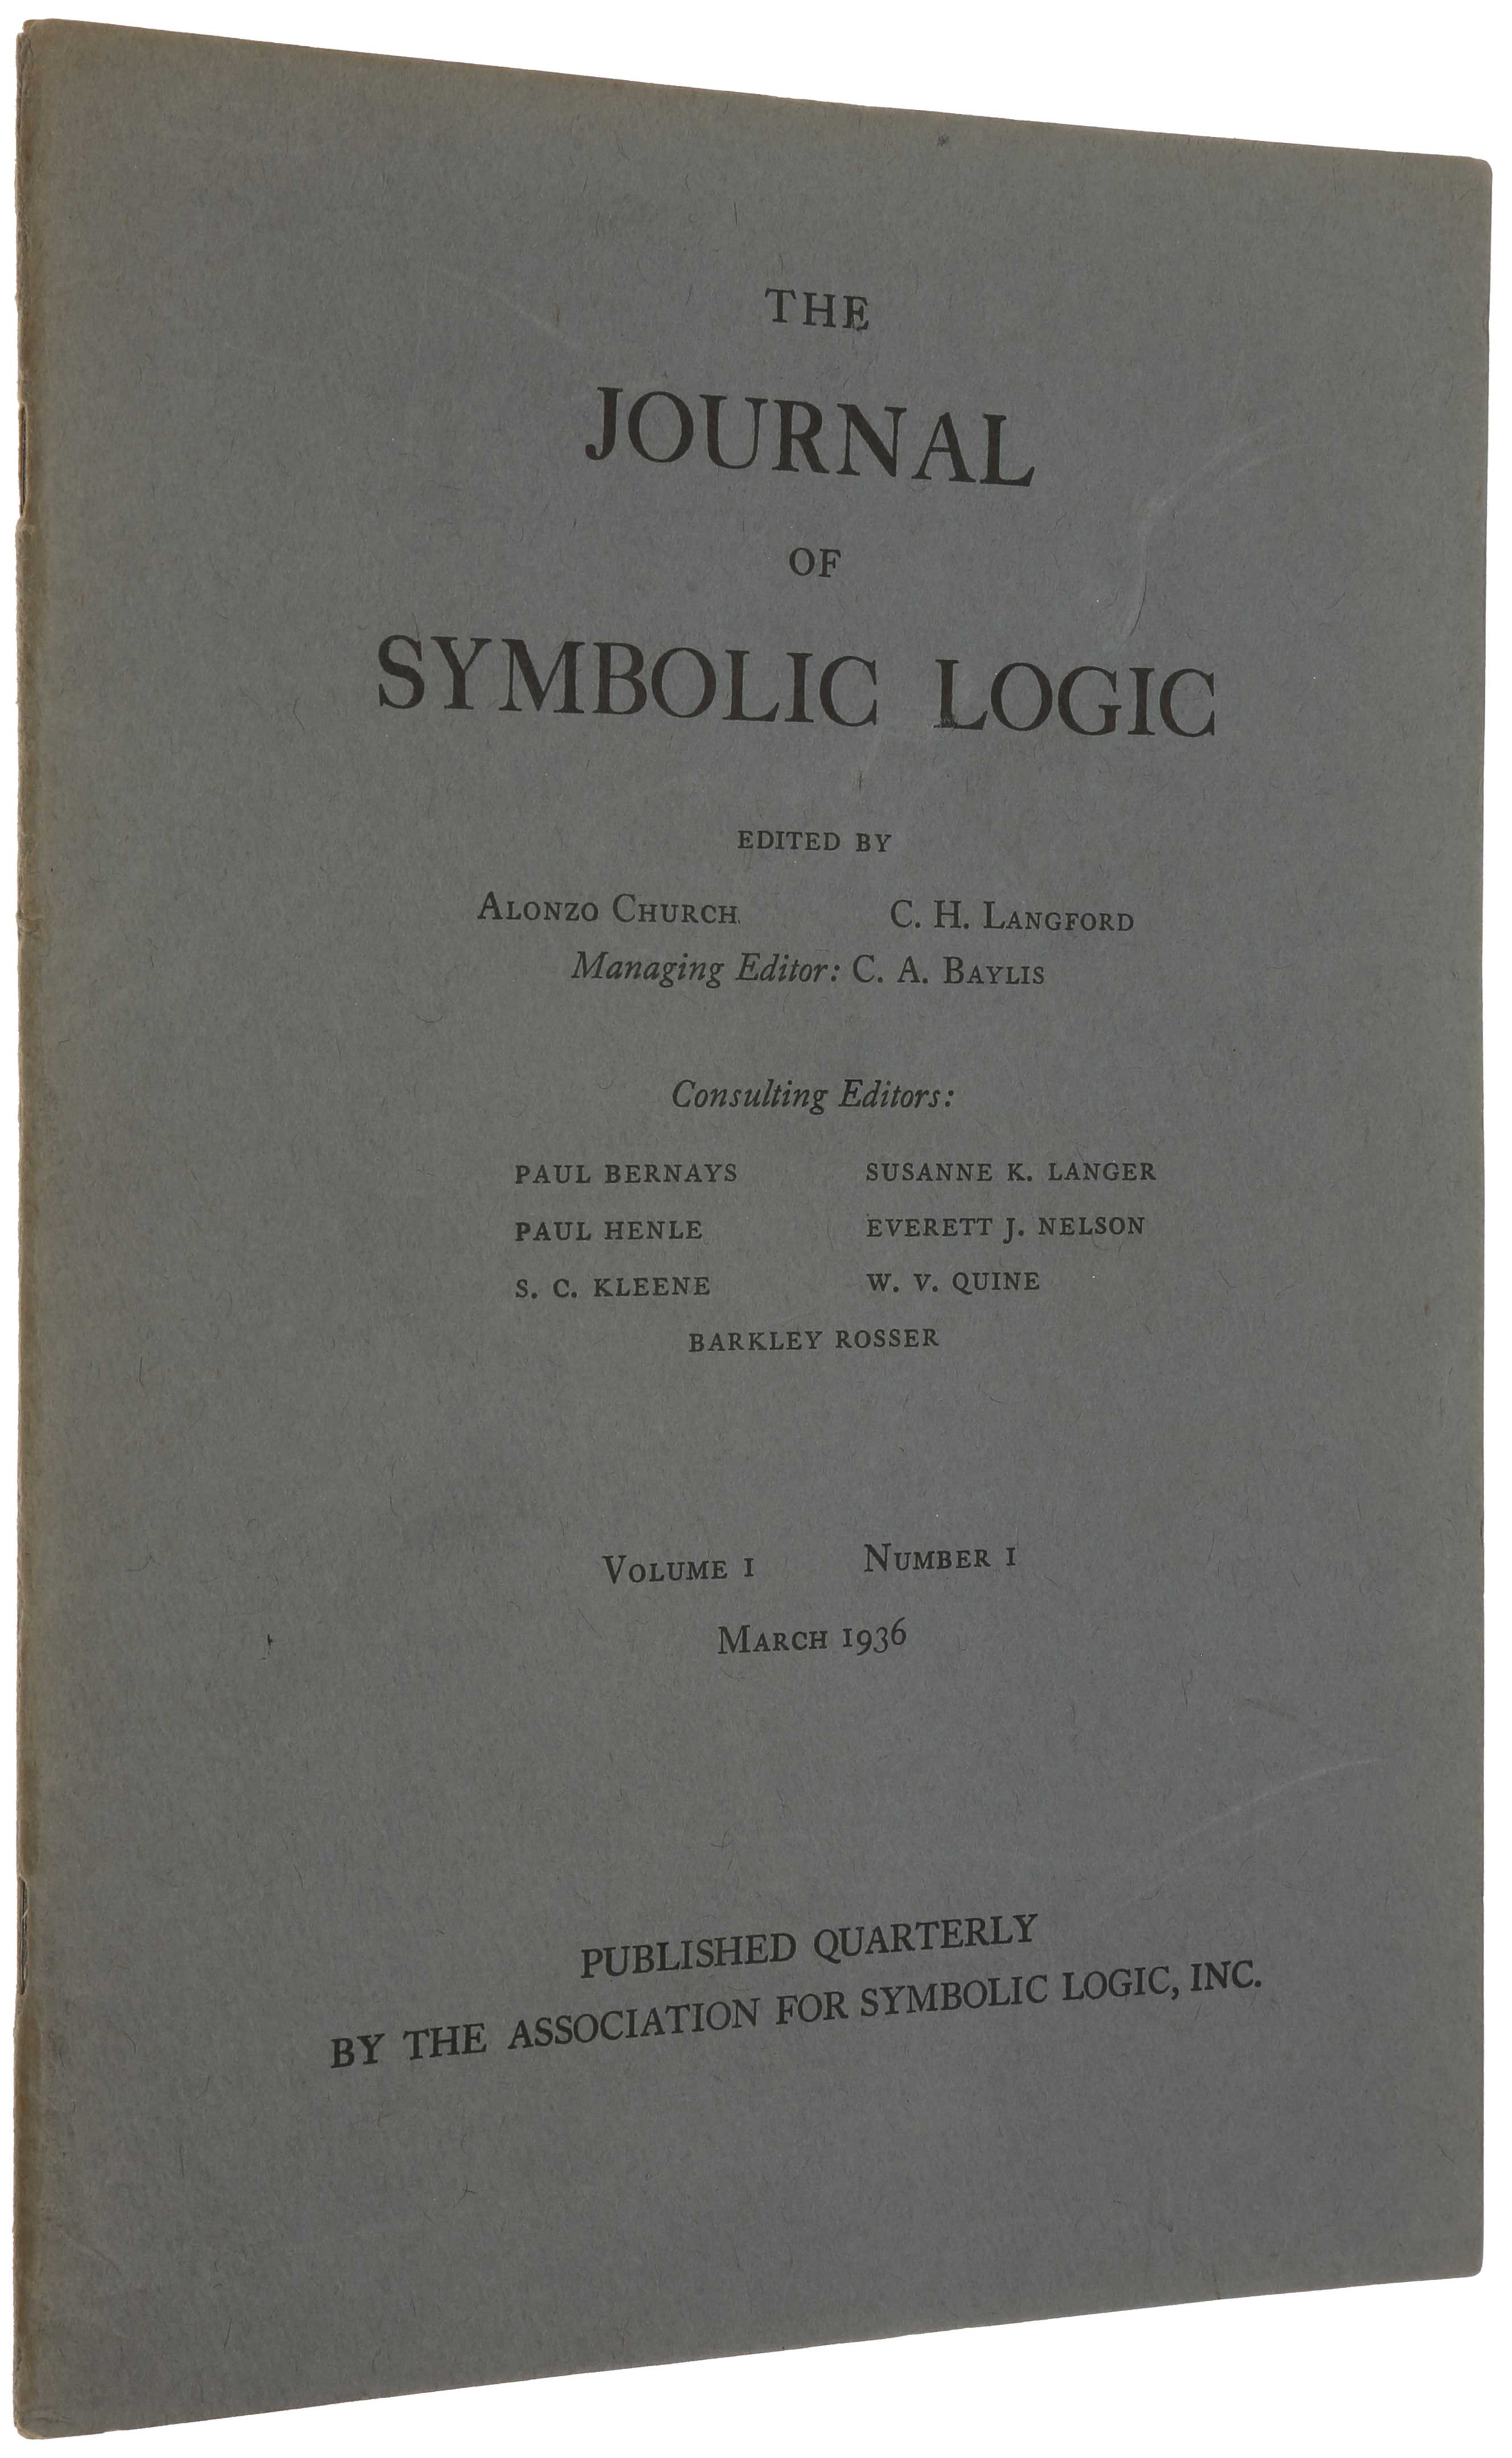 Item #5483 ‘A Note of the Entscheidungsproblem,’ pp. 40-41 in The Journal of Symbolic Logic, Vol. 1, No. 1, March 1936. Alonzo CHURCH.